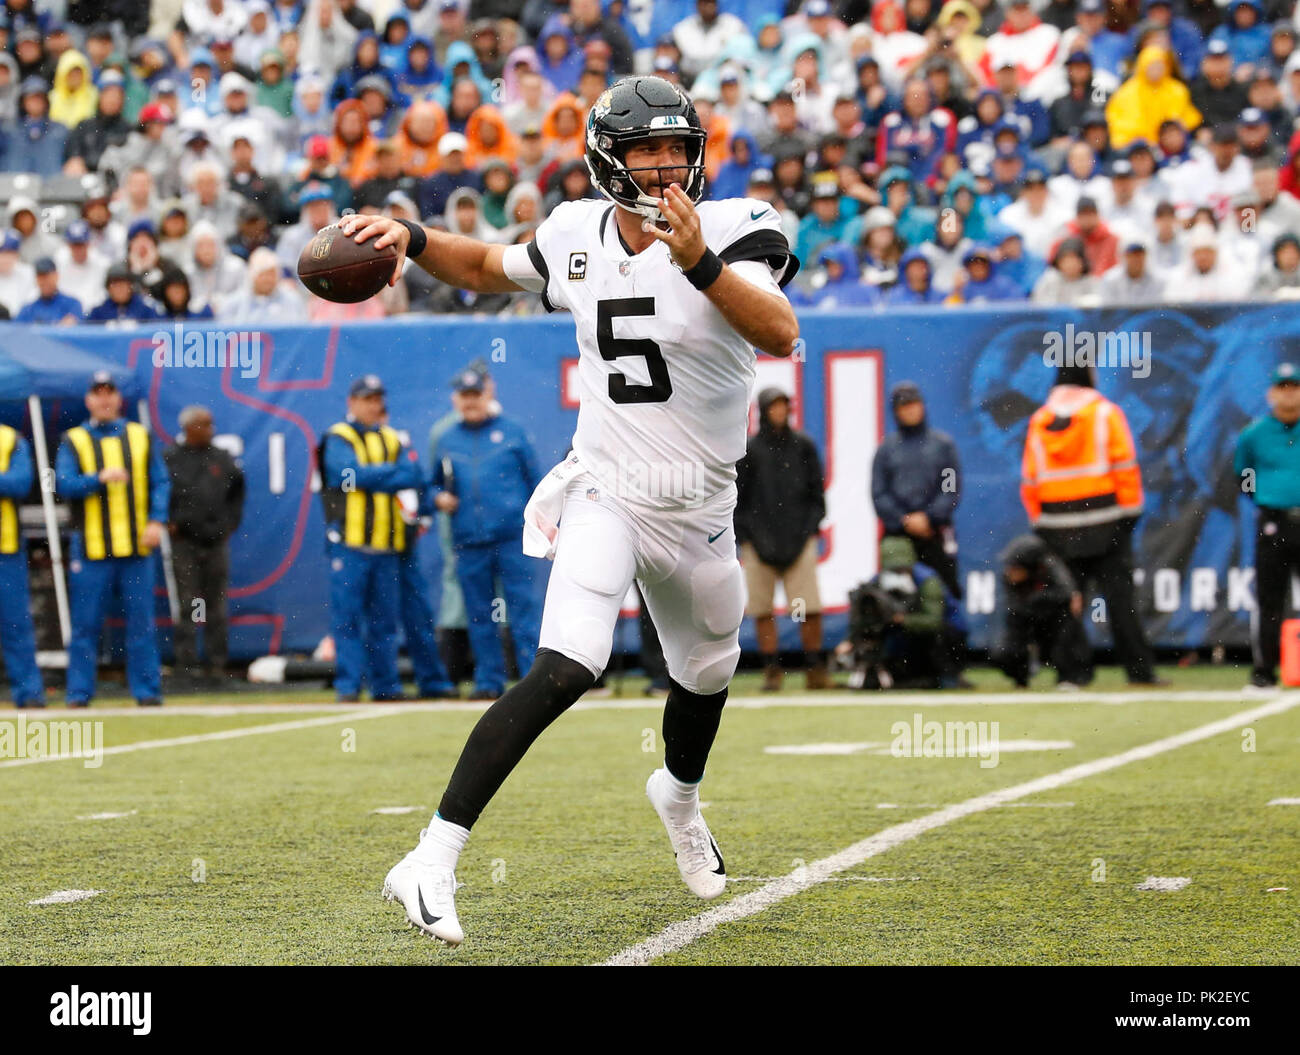 September 9, 2018 - East Rutherford, New Jersey, U.S. - Jacksonville Jaguars quarterback Blake Bortles (5) looks to pass during a NFL game between the Jacksonville Jaguars and the New York Giants at MetLife Stadium in East Rutherford, New Jersey. The Jaguars defeated the Giants 20-15. Duncan Williams/CSM Stock Photo